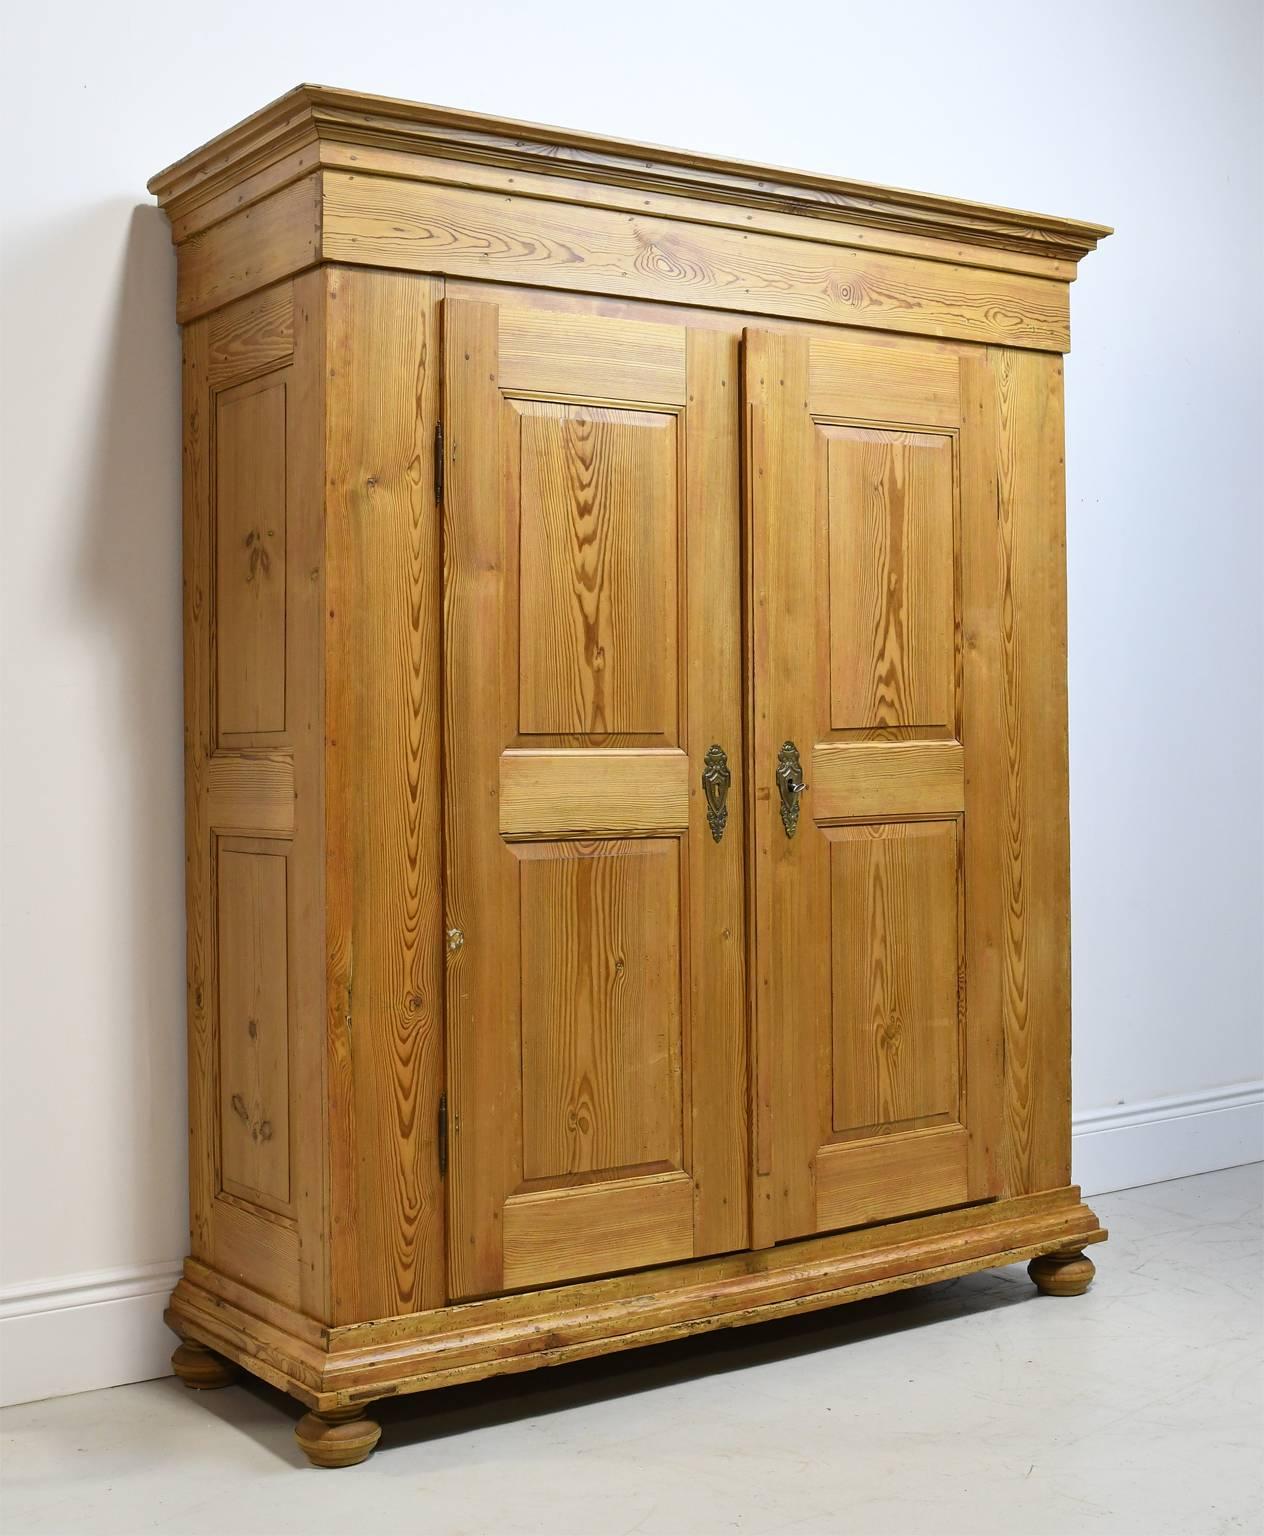 This exceptionally well-made armoire in a type of pine with a height pitch content called "kiefer", is constructed with pegged mortice and tenon joinery along with dovetail joints. All of the moldings are fastened to the frame with wooden